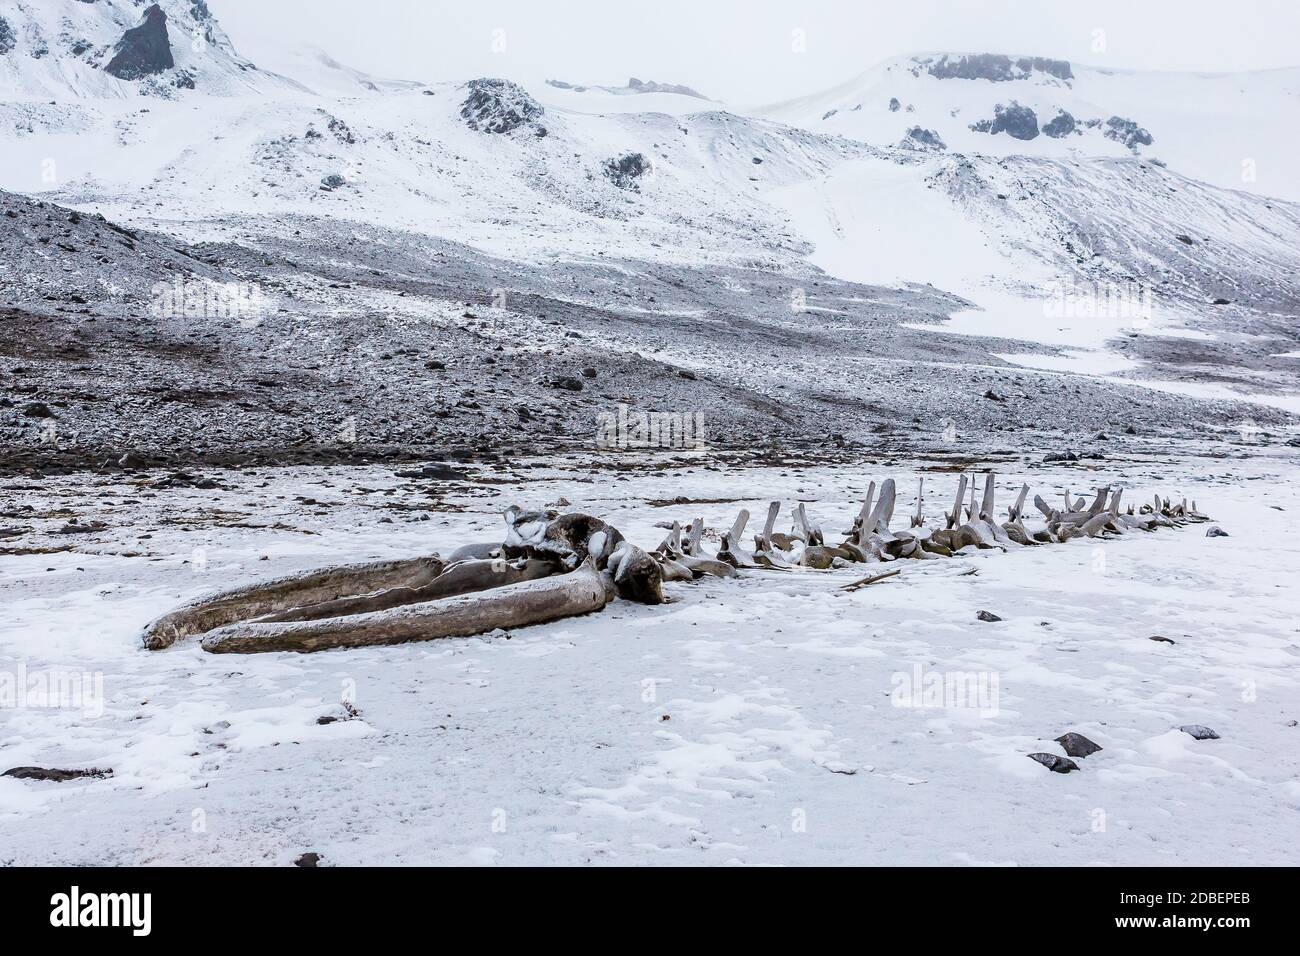 Beautiful landscape and scenery in Antarctica. Freezing Stock Photo